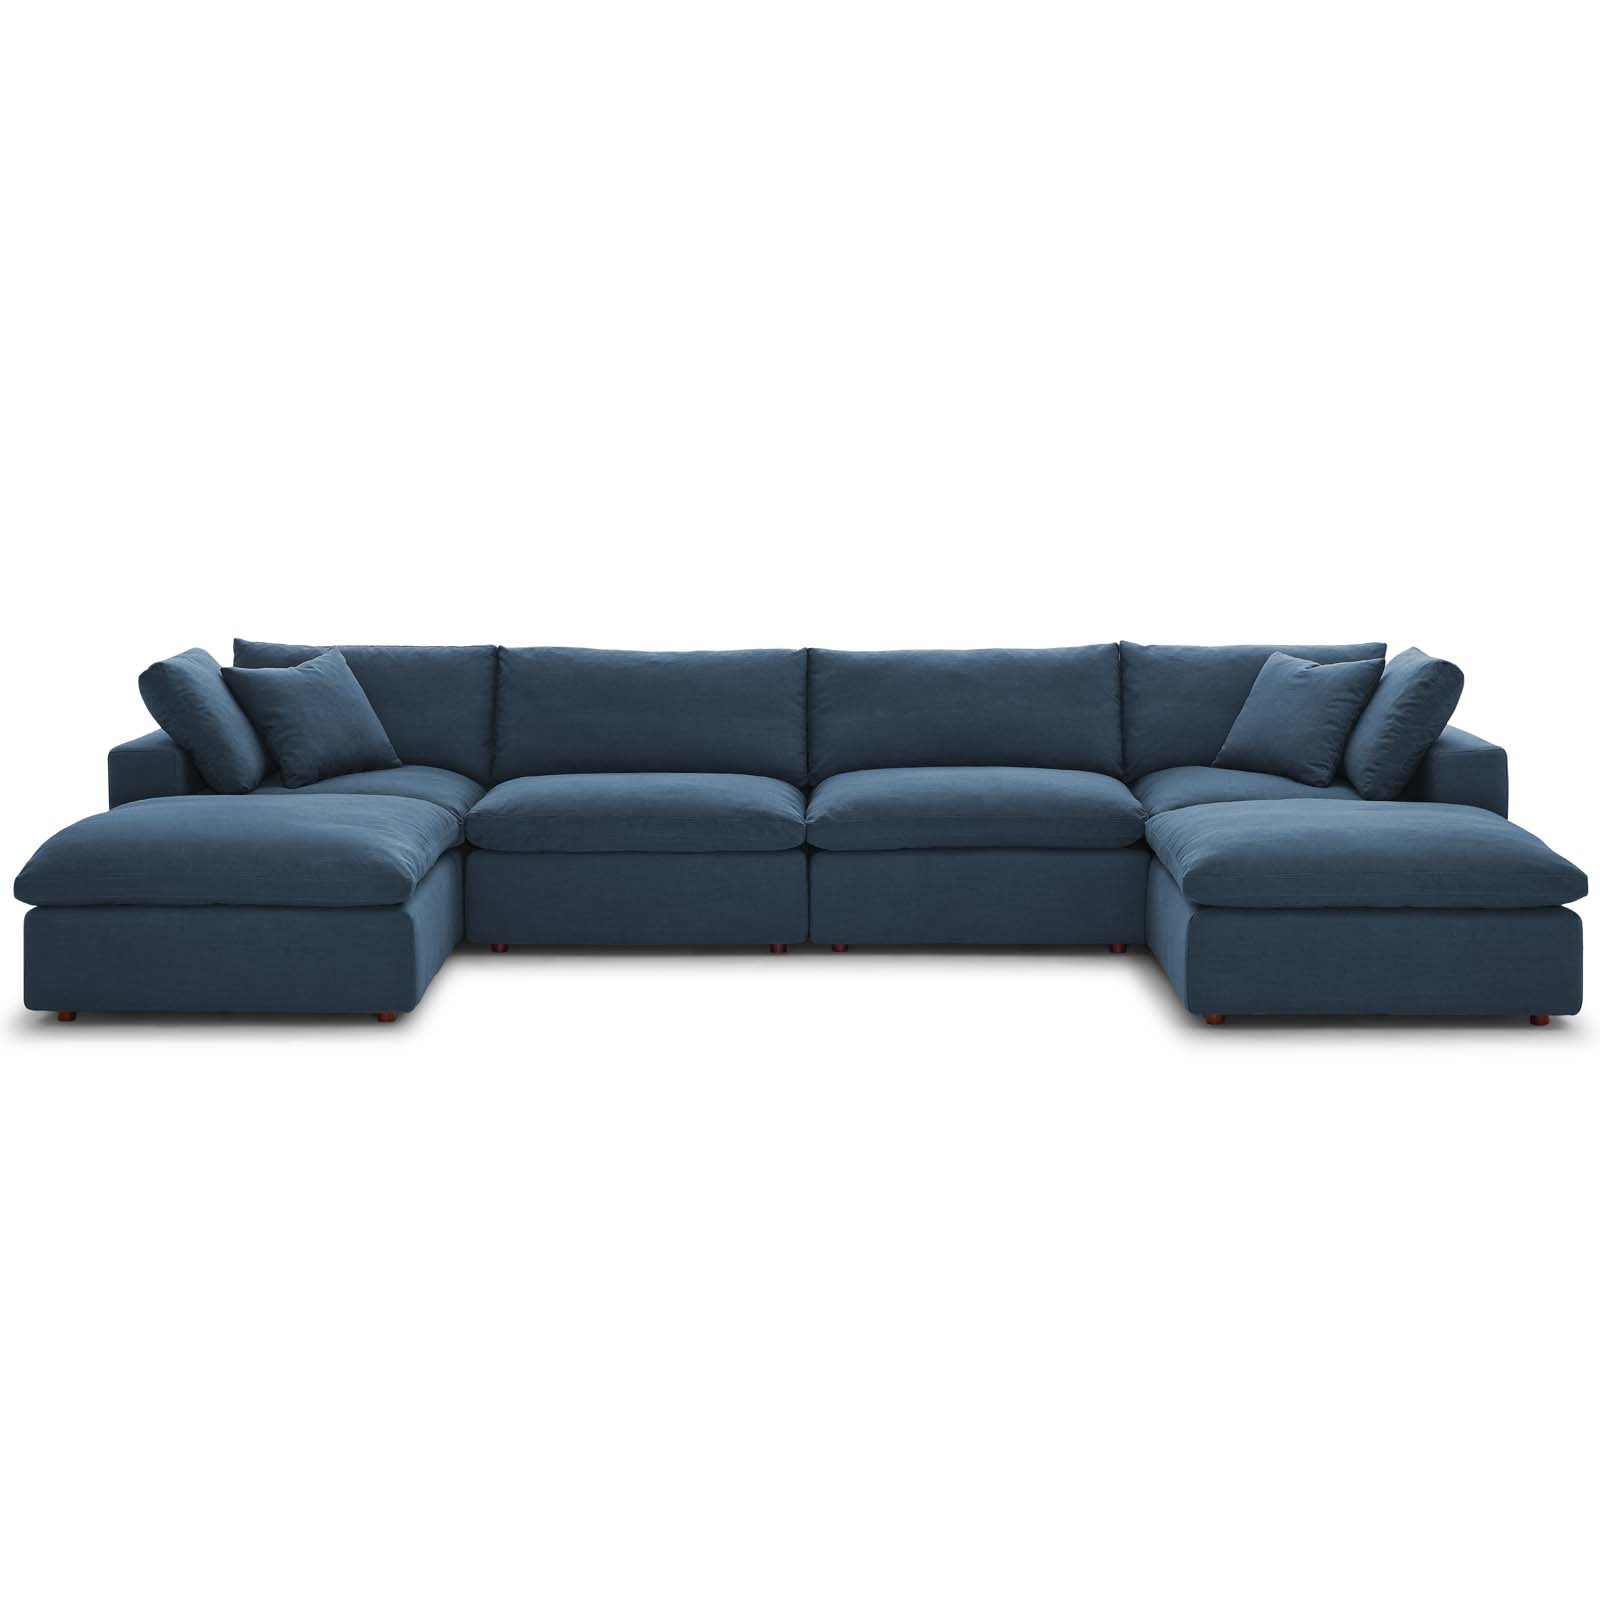 Modern Occasional Commix Down Filled Overstuffed 6 Piece Sectional Sofa Set